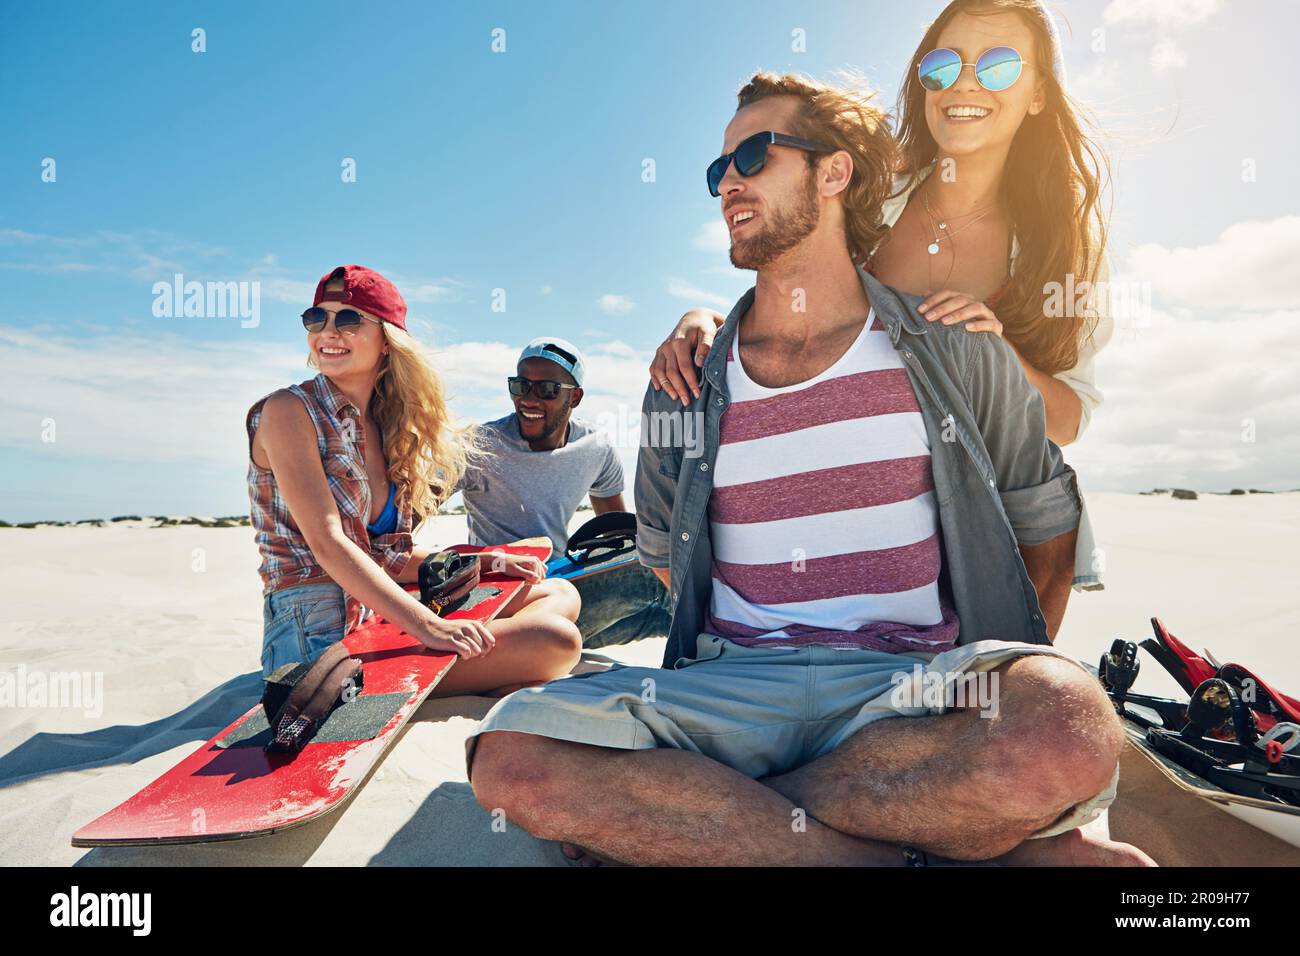 The best day are spent out on the dunes. a group of young friends sandboarding in the desert. Stock Photo